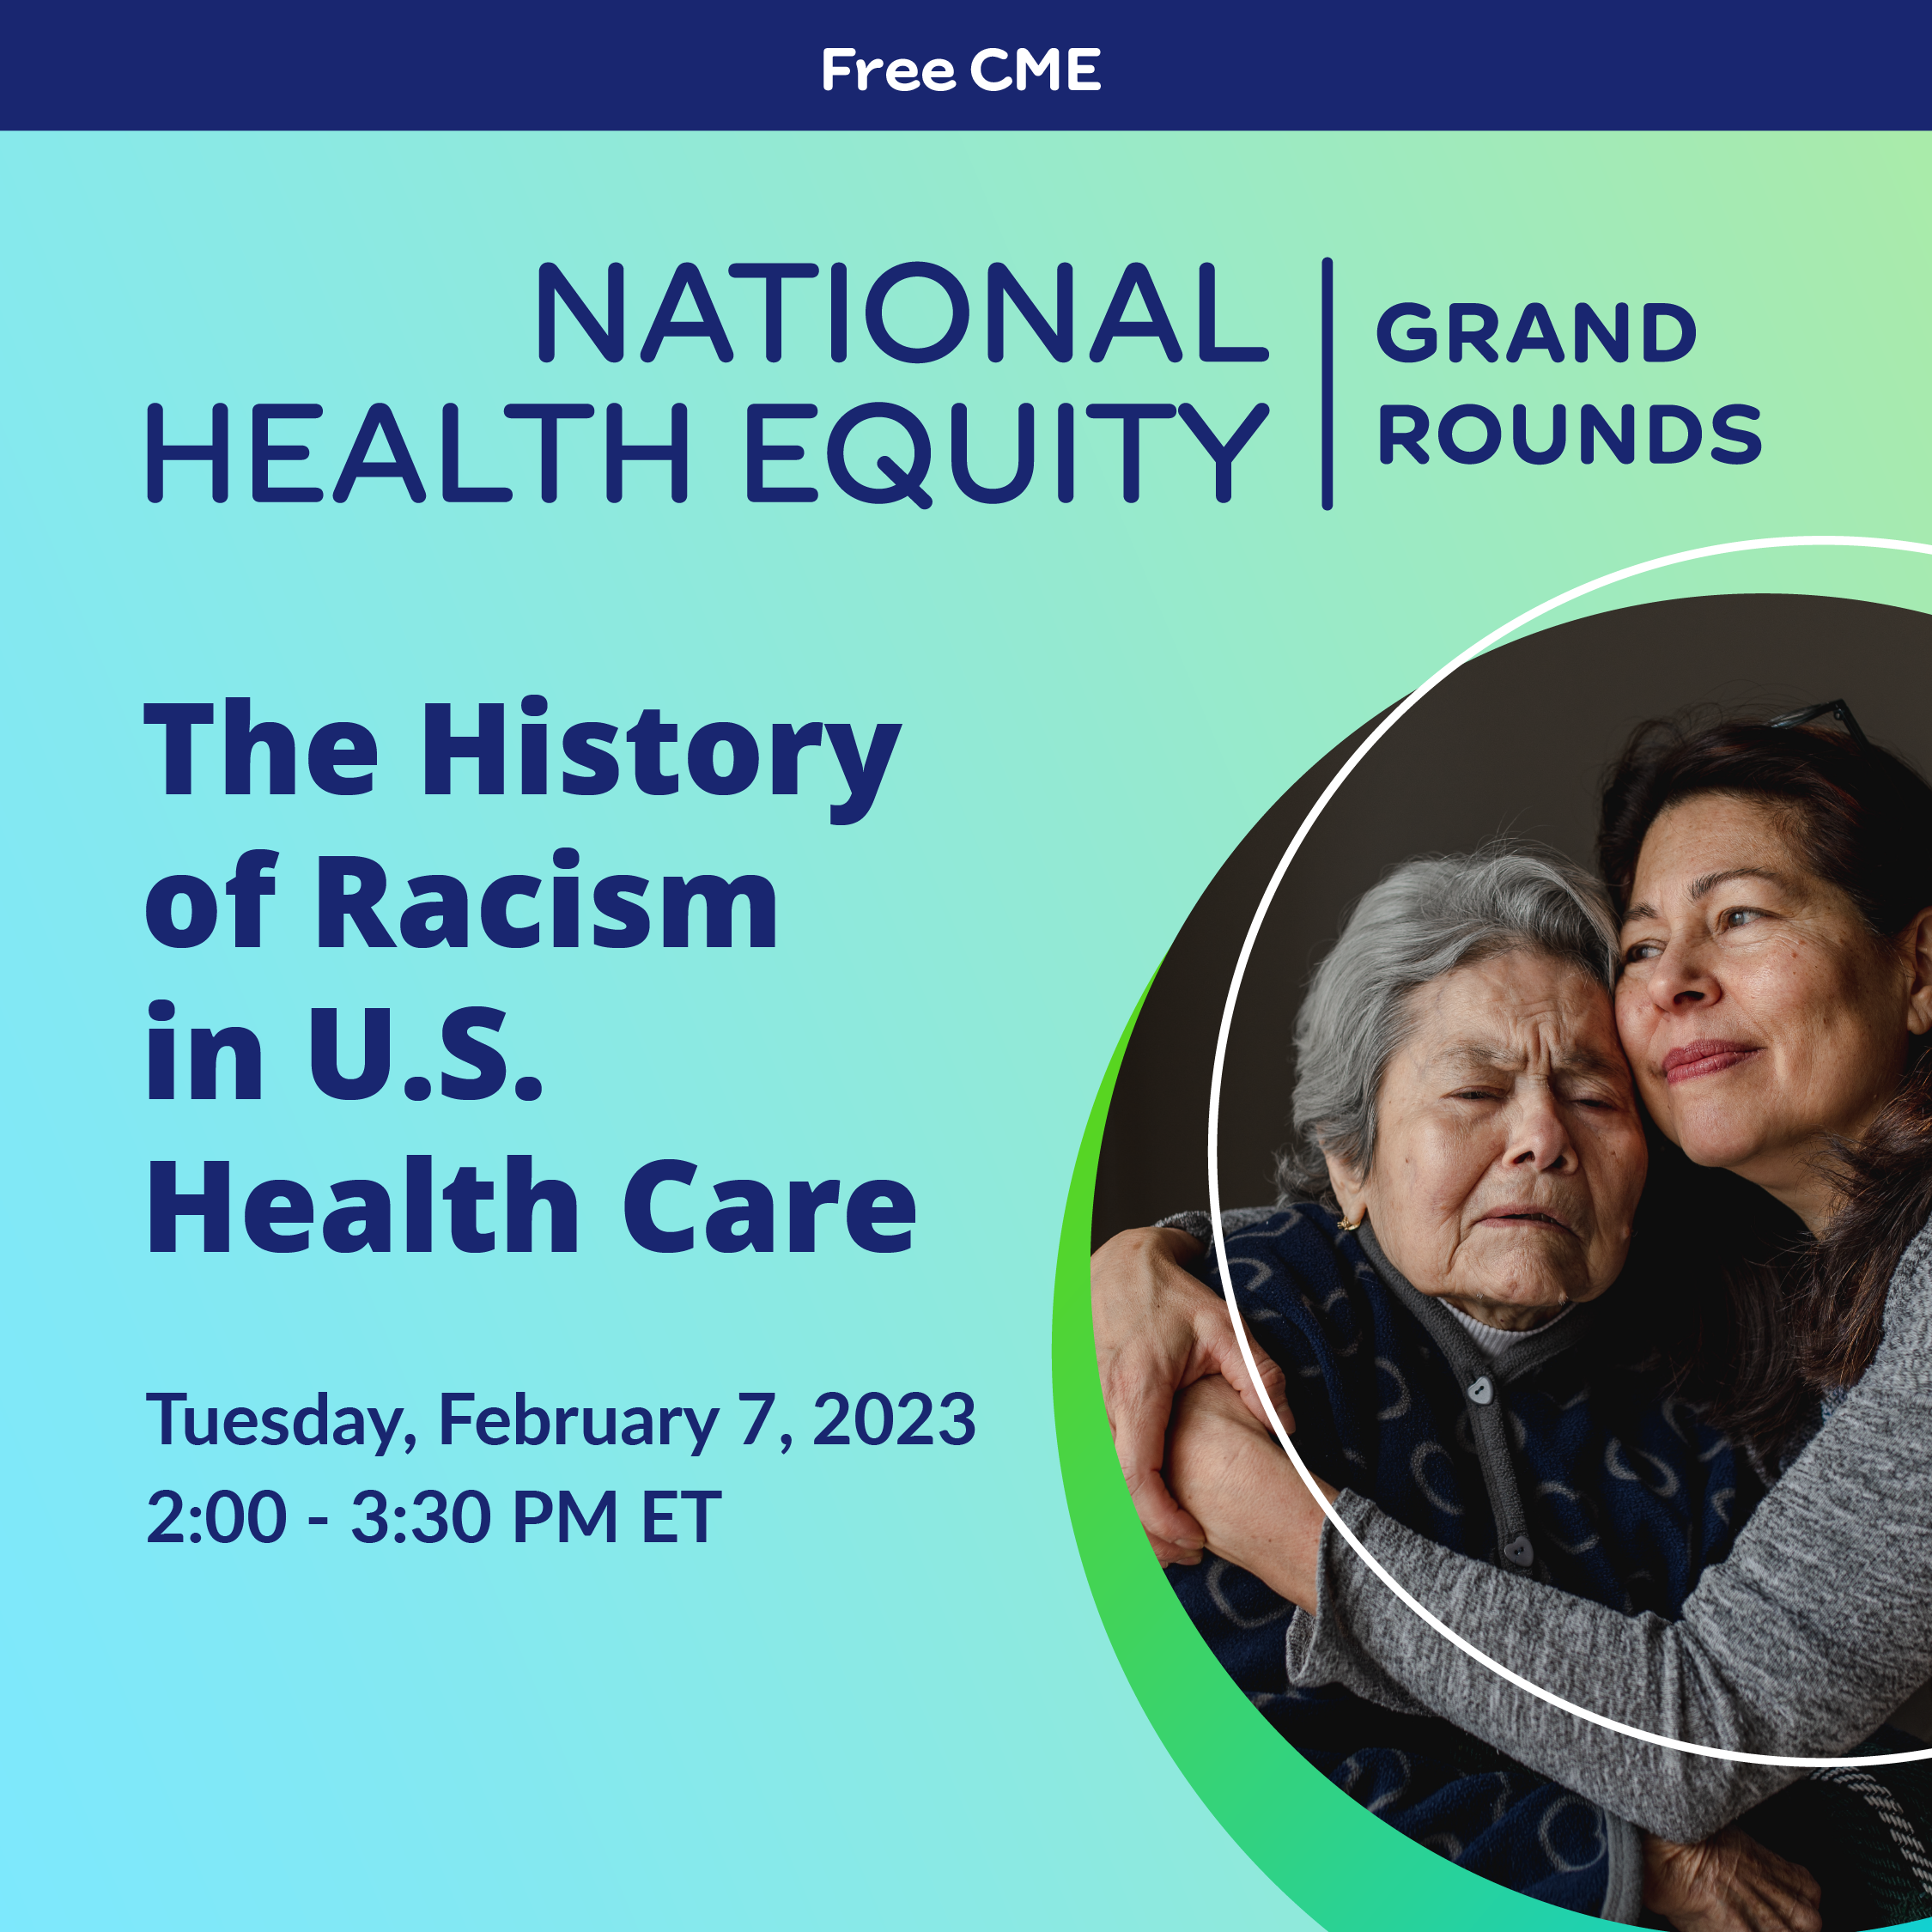 Health Equity Grand Rounds event